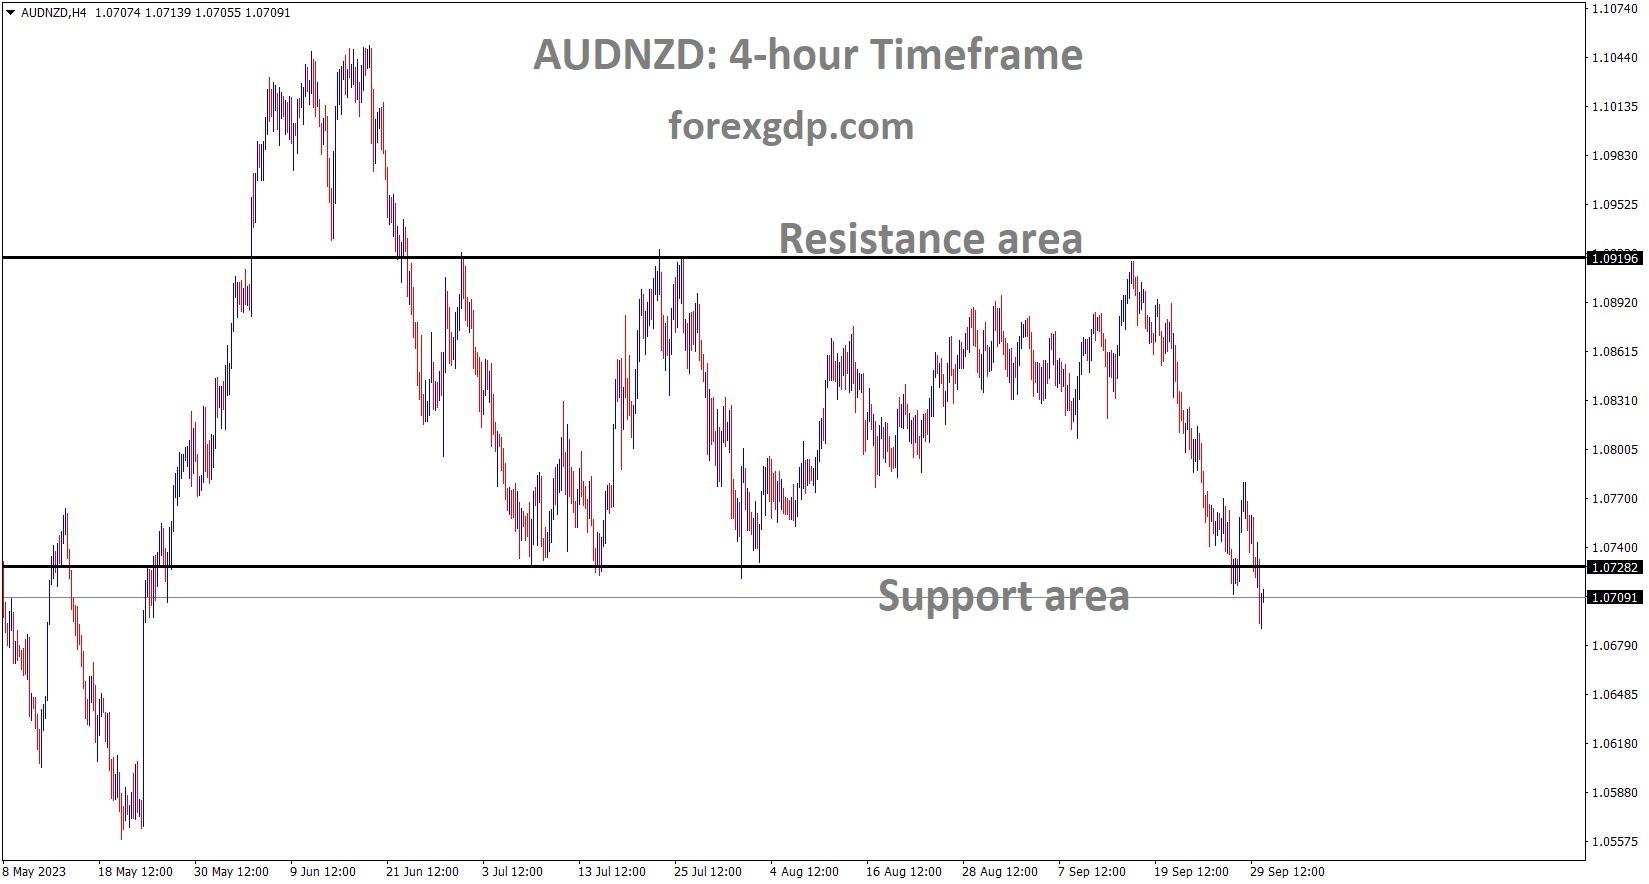 AUDNZD is moving in the Box pattern and the market has reached the support area of the pattern